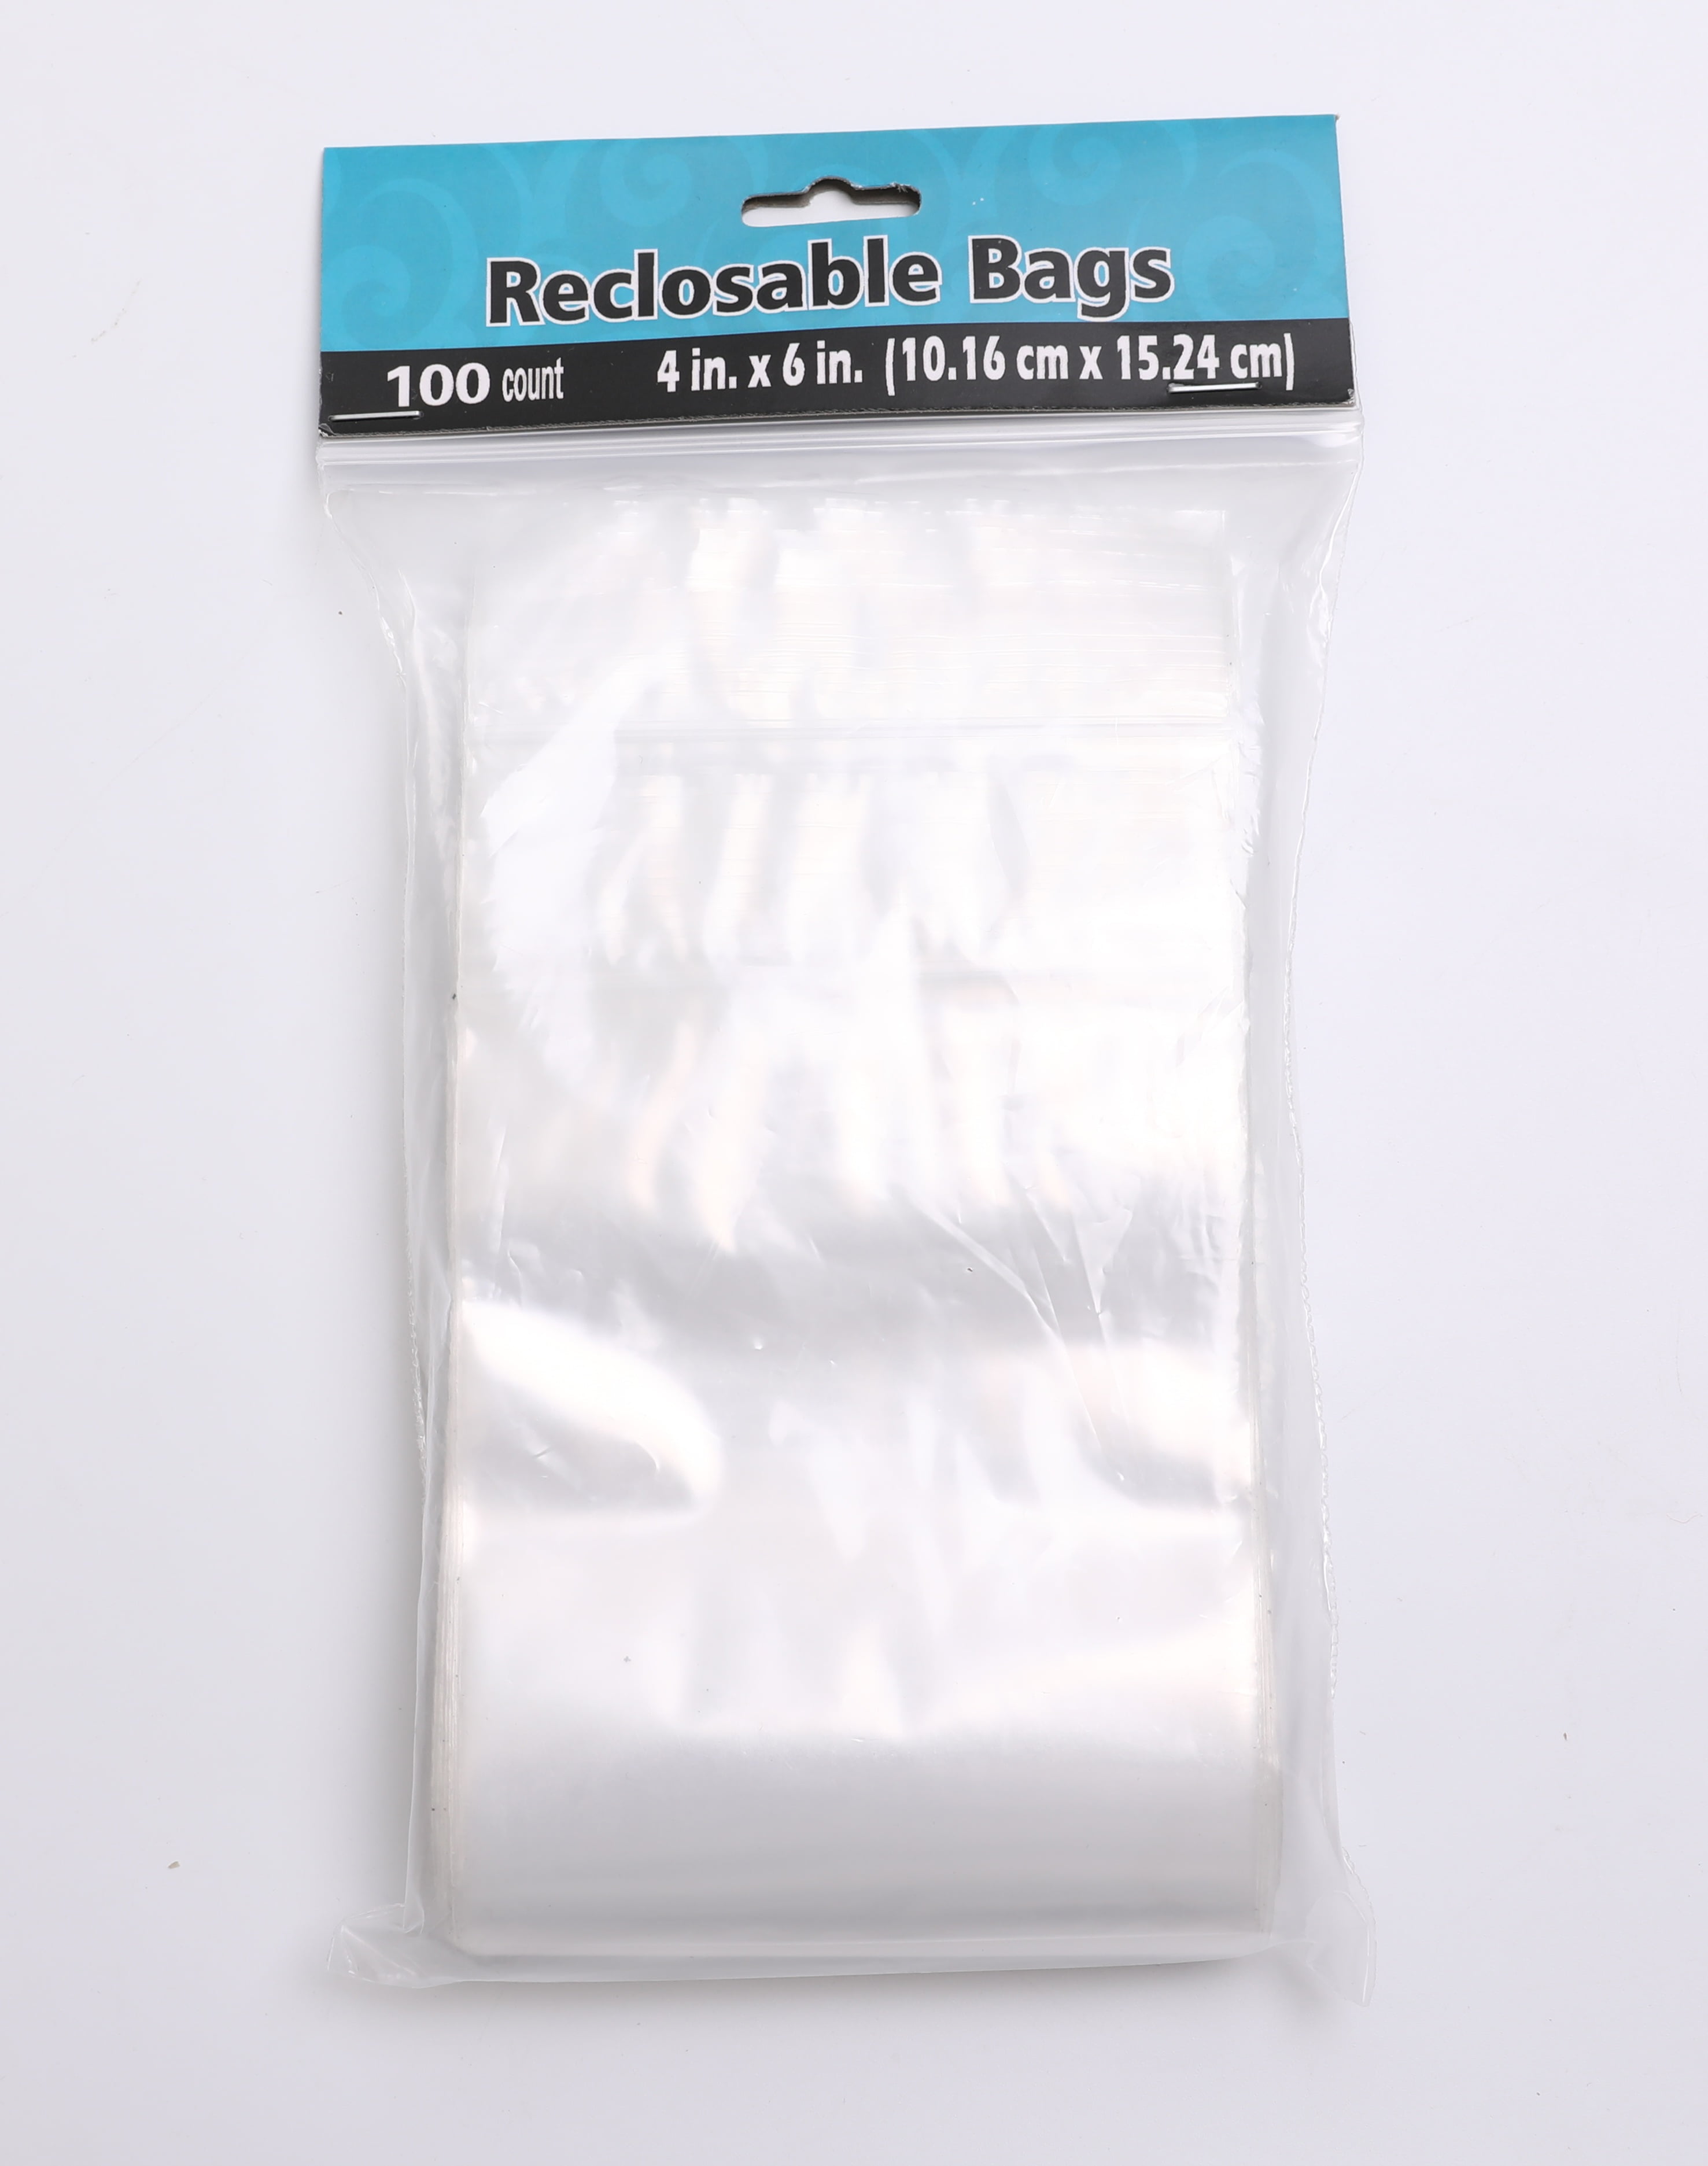 Small Reclosable Bags 4 x 7 2 Mil Clear Zipper Plastic Bag Pack of 10000 Count 